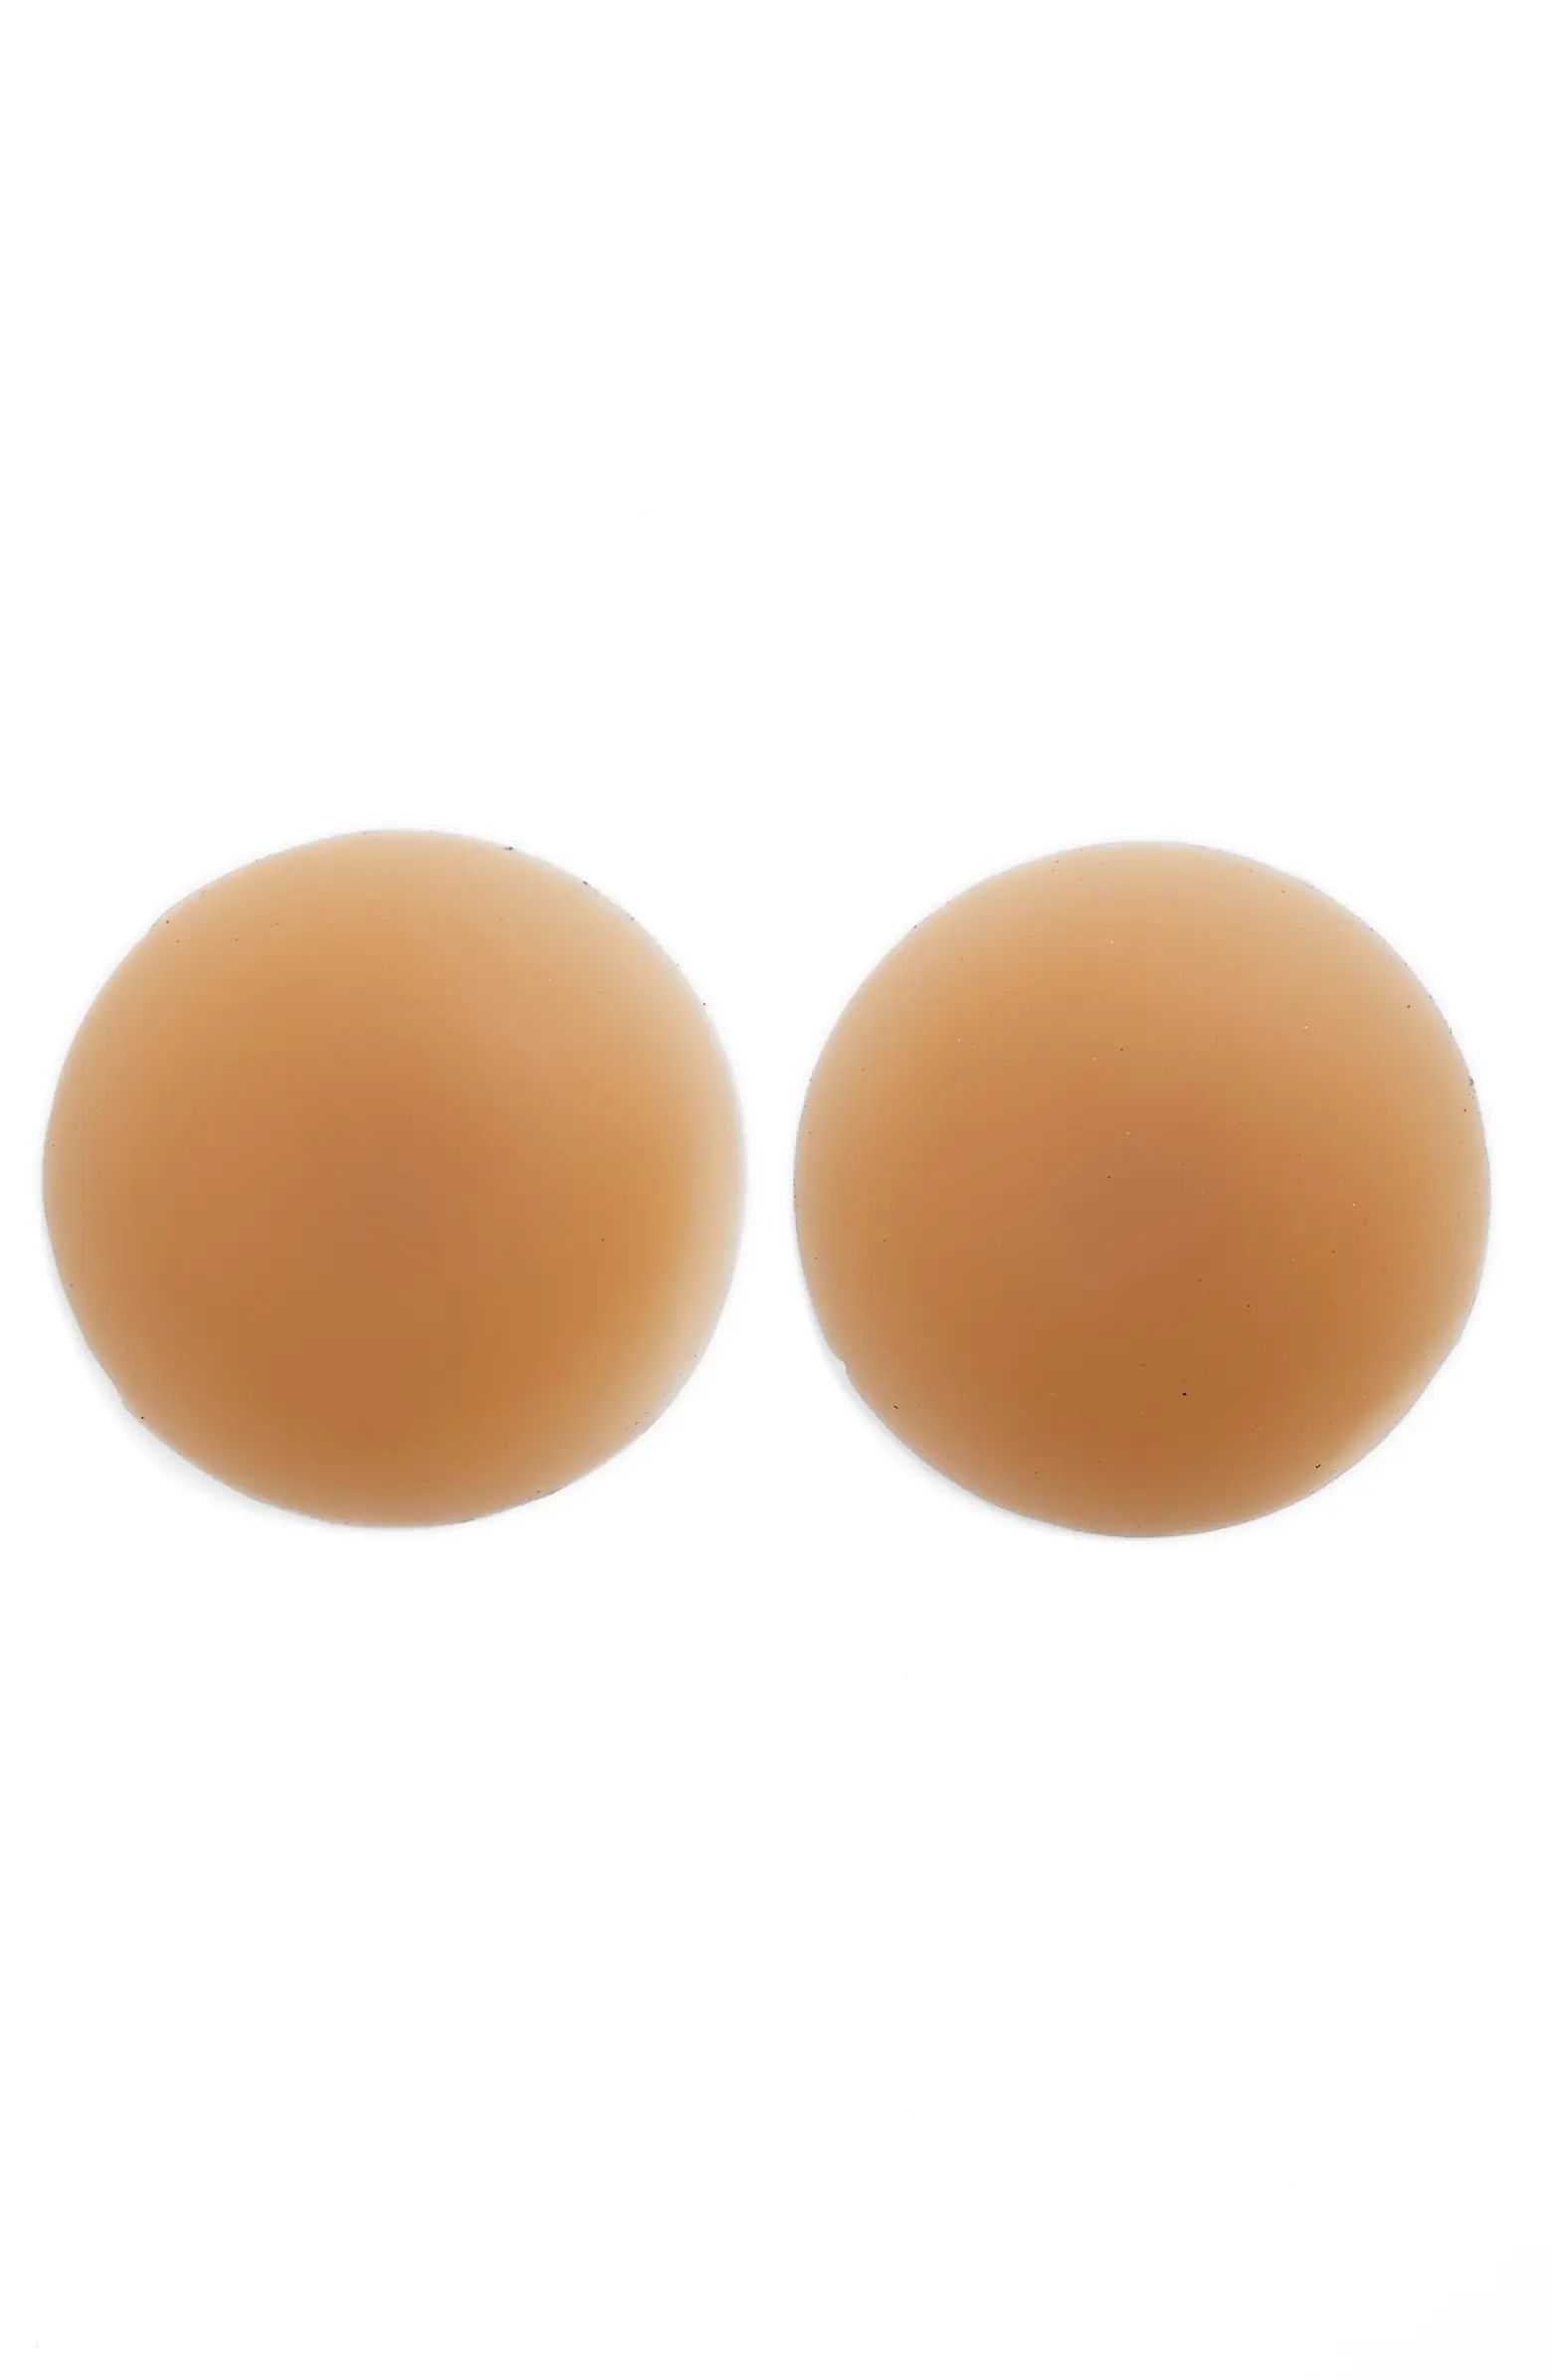 Bristols 6 Nippies by Bristols Six Skin Reusable Adhesive Nipple Covers | Nordstrom | Nordstrom